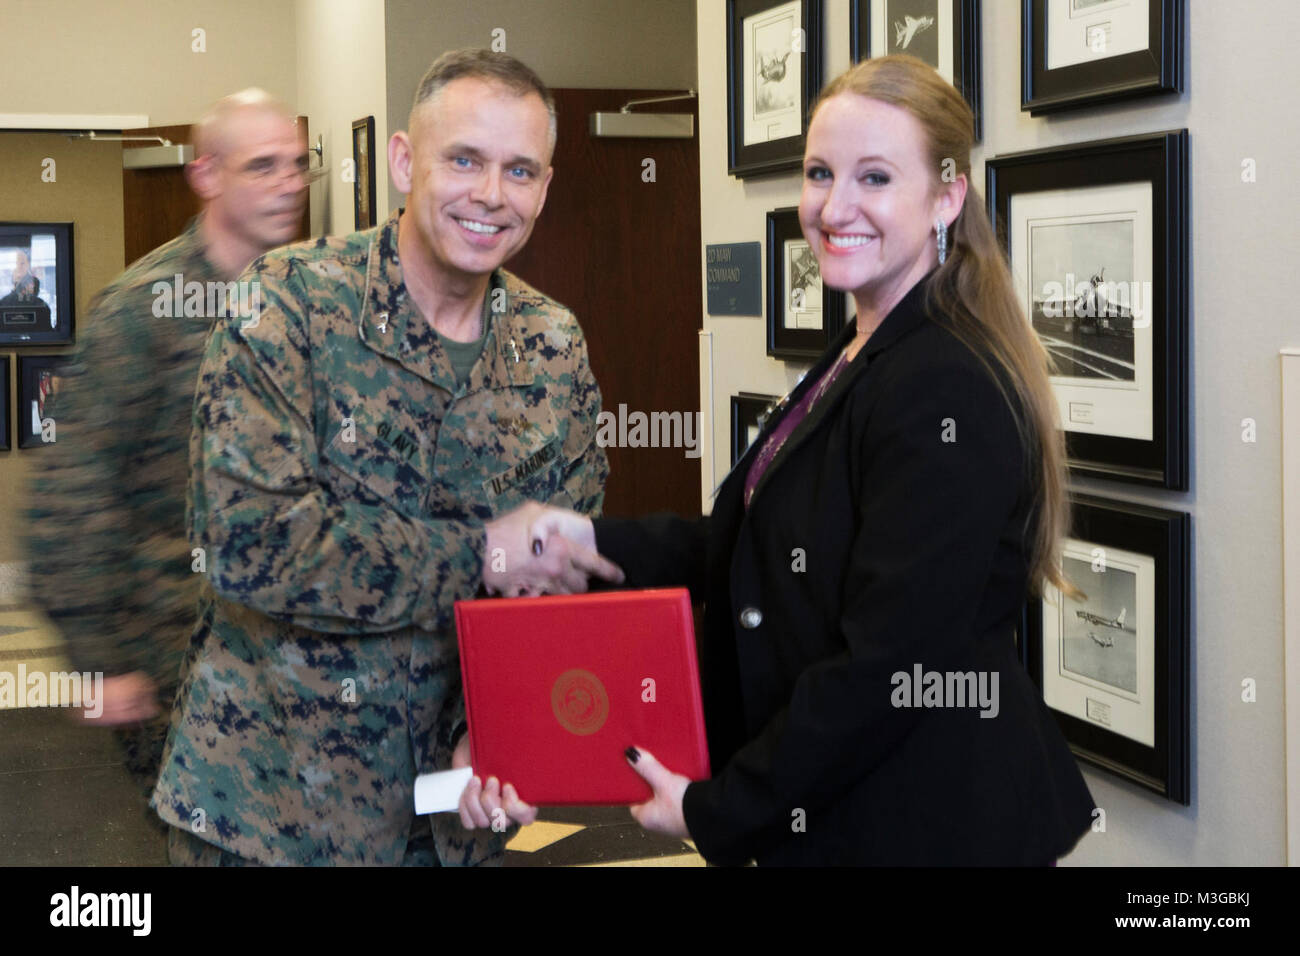 Jennifer Merlo, the Single Marine Program (SMP) coordinator for Marine Corps Air Station Cherry Point, receives a Certificate of Commendation from U.S. Marine Corps Maj. Gen. Matthew G. Glavy, the commanding general of 2nd Marine Aircraft Wing, at MCAS Cherry Point, N.C., Jan. 30, 2018. Merlo helped maintain the best SMP from July 2013 to Dec. 2017 and accumulated the highest number of volunteers and volunteer hours in 2017. (U.S. Marine Corps Stock Photo